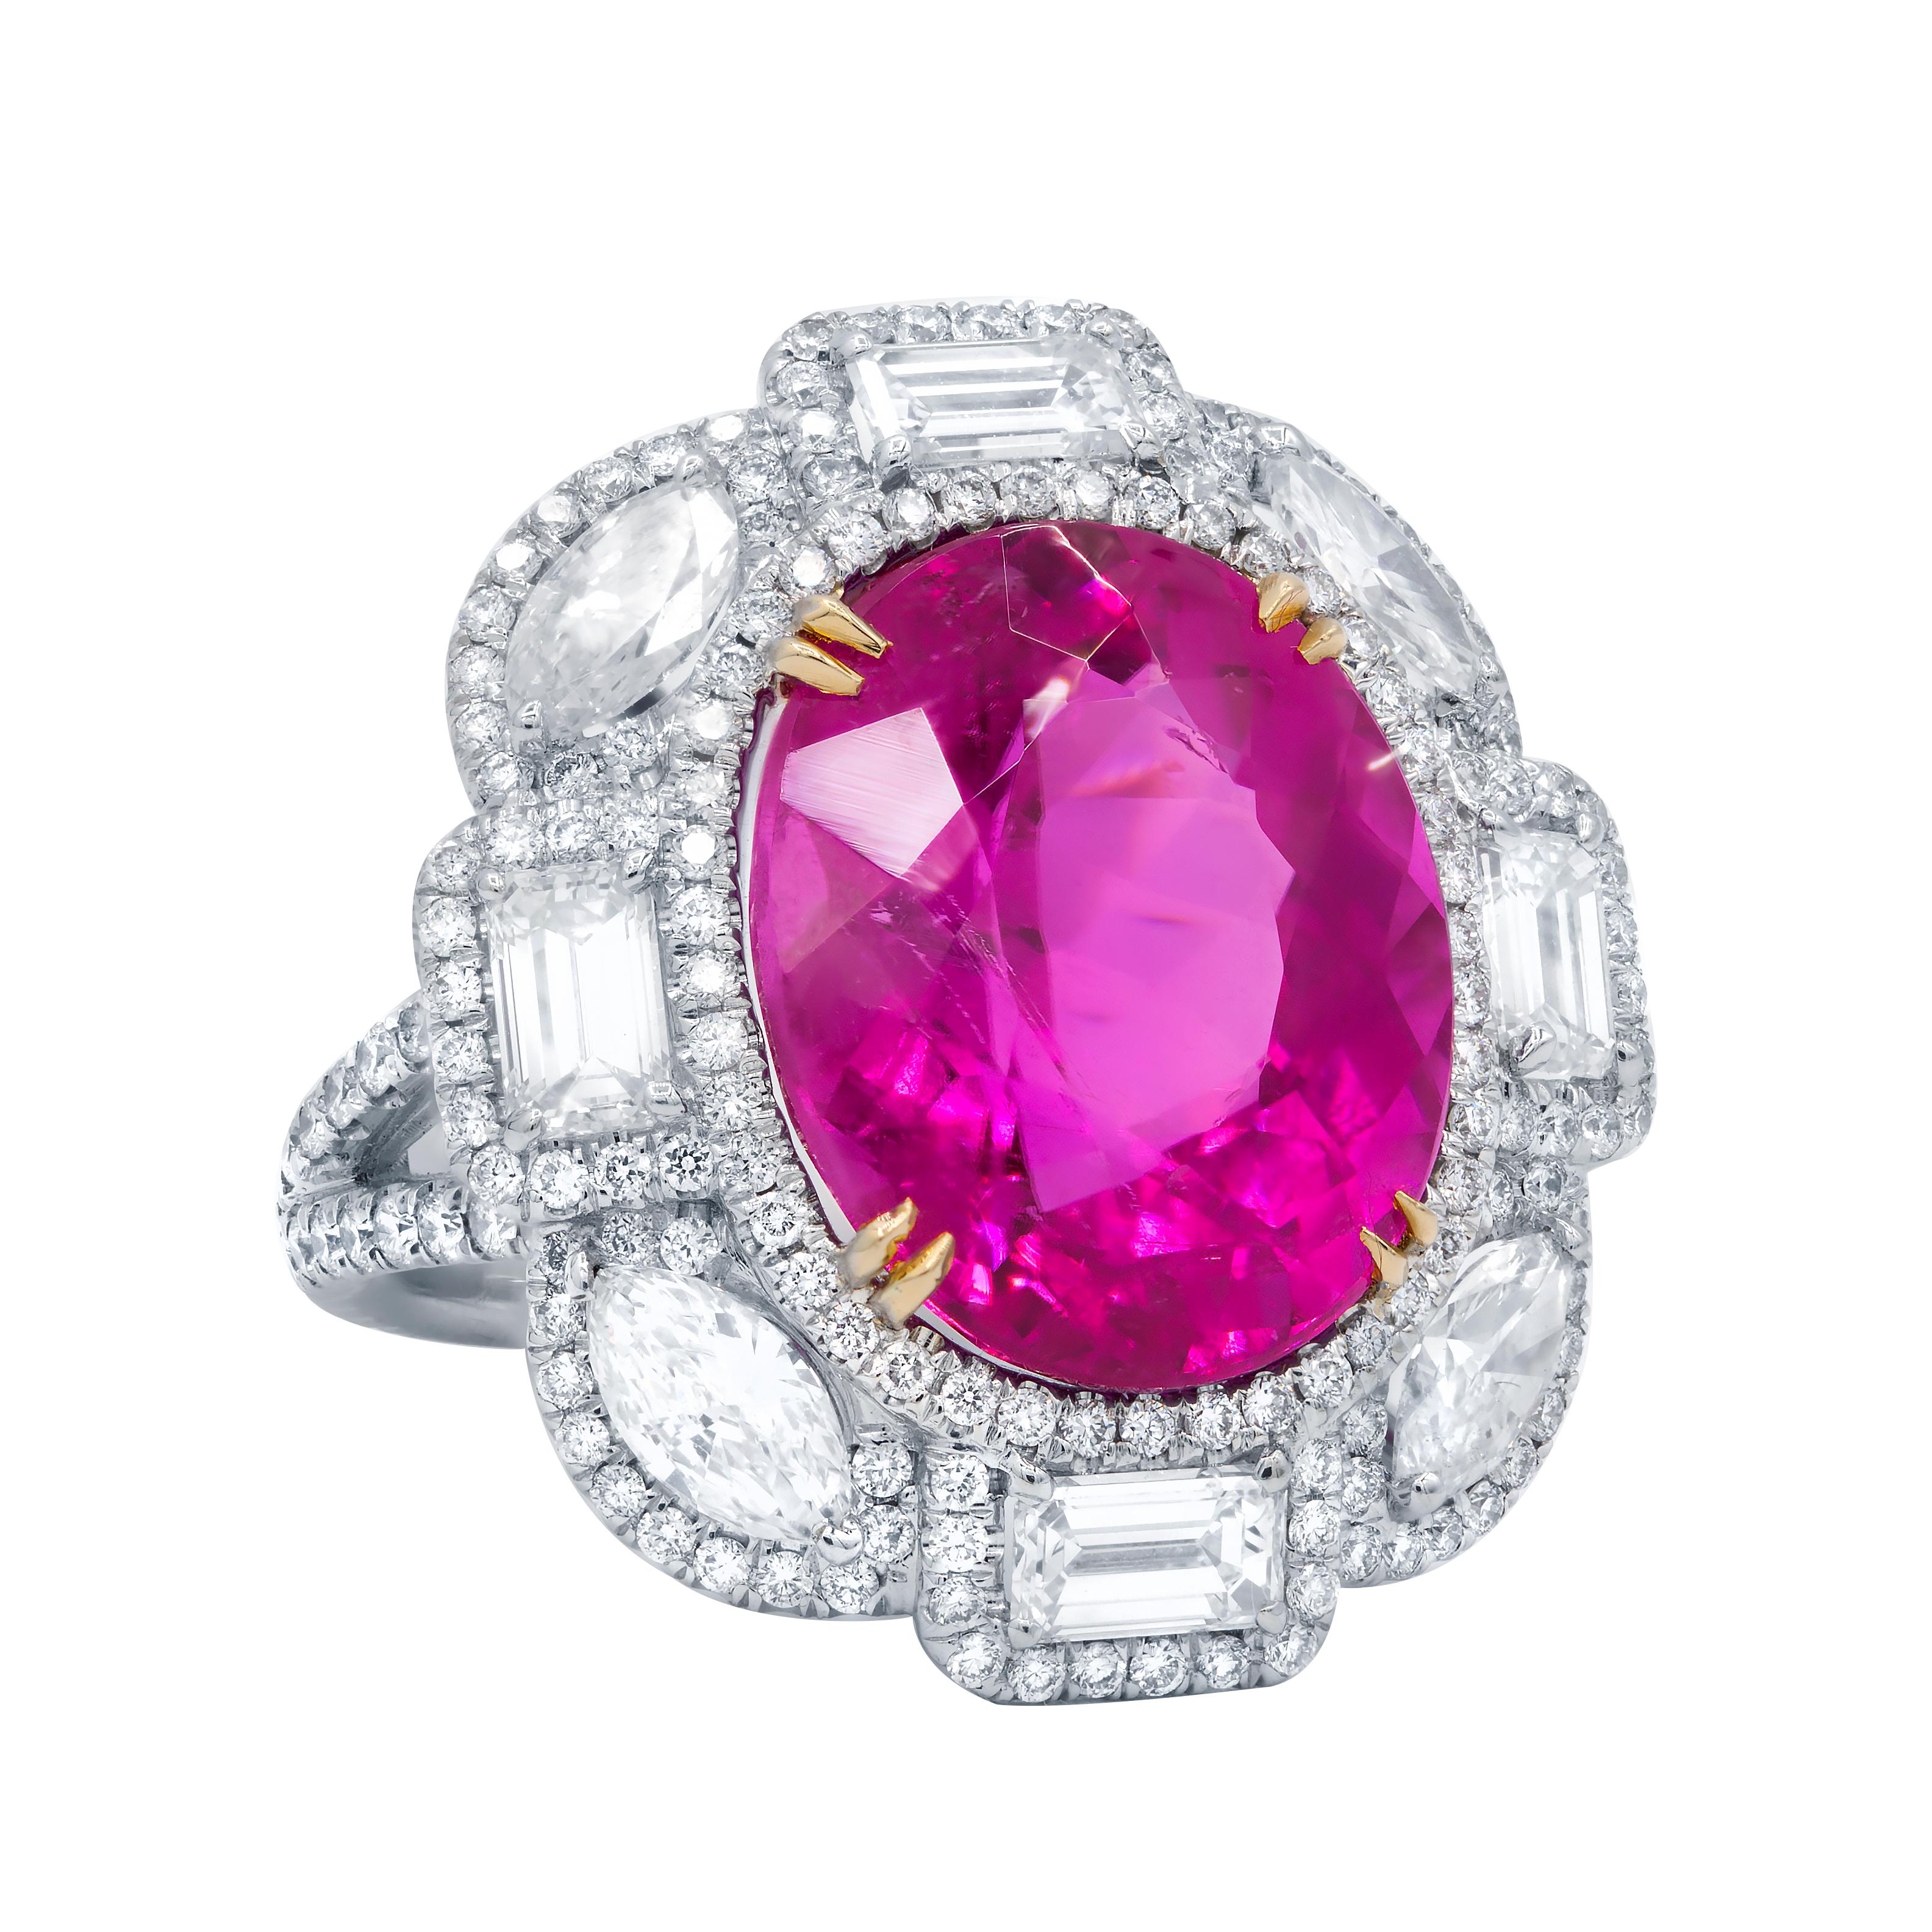 Platinum tourmaline and diamond ring featuring a center 11.80 ct pink tourmaline surrounded by emerald cut, marquise cut, and round diamonds with 2 rows of diamonds totaling 3.80 cts tw.
Diana M. is a leading supplier of top-quality fine jewelry for